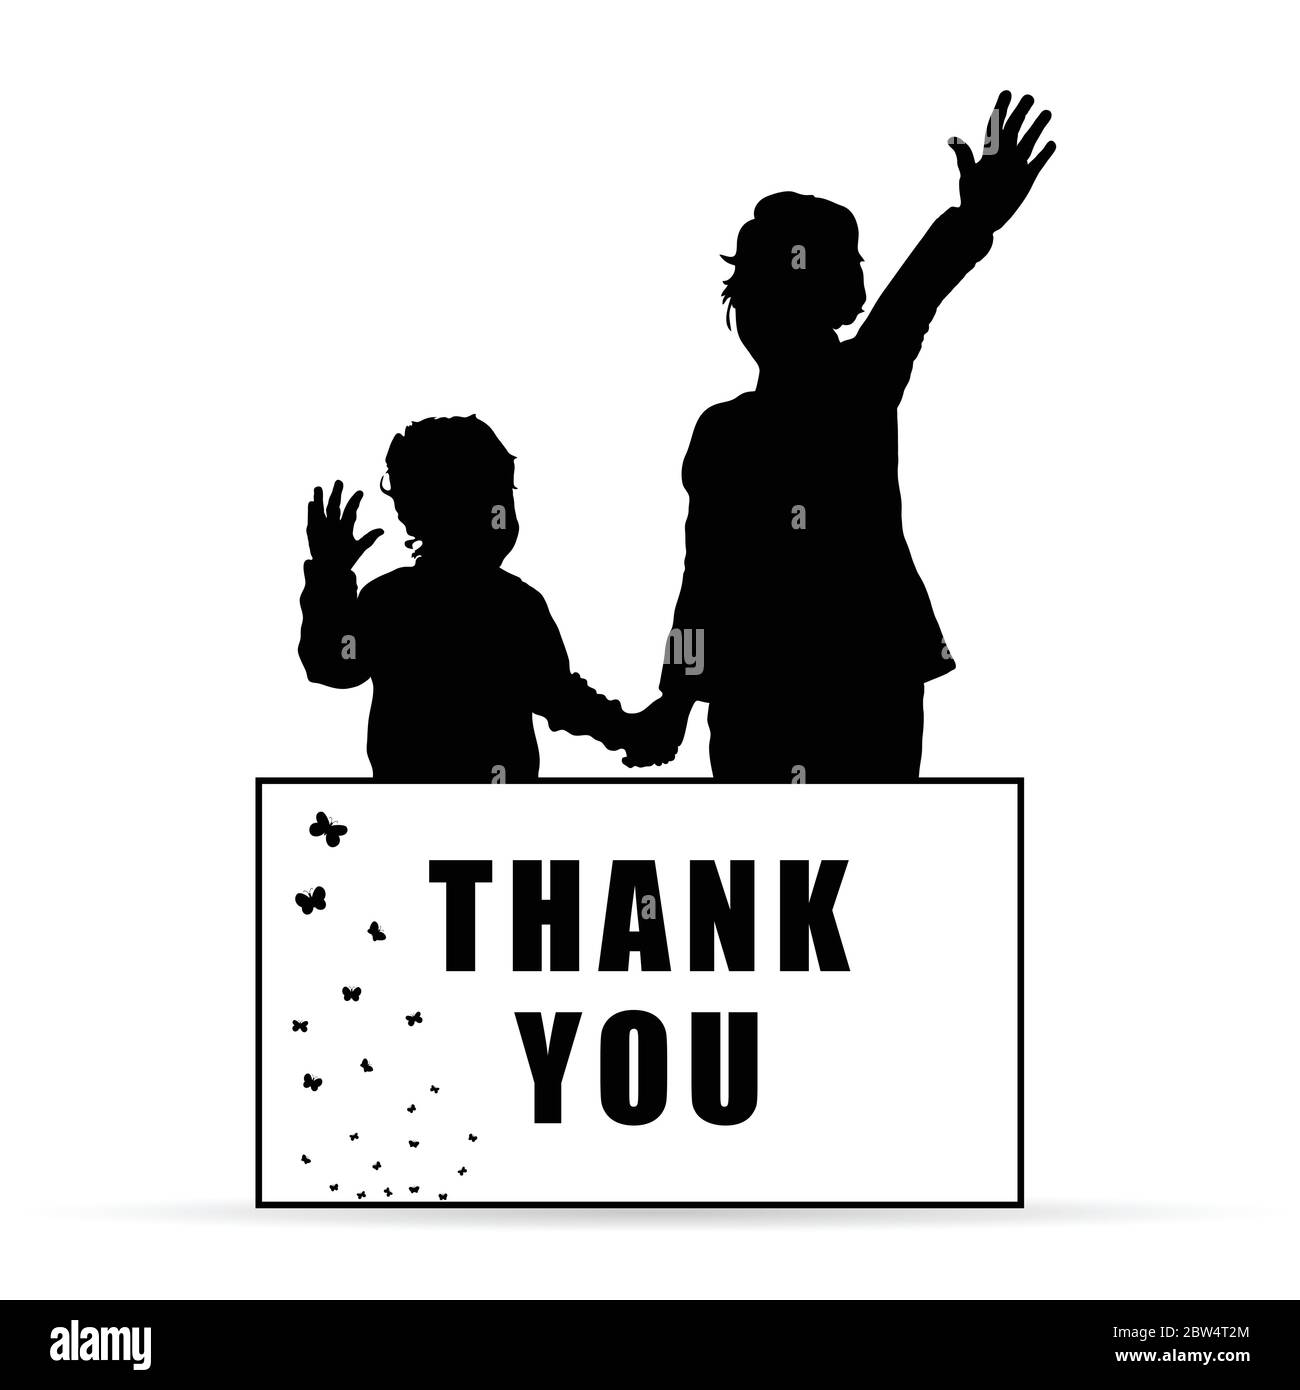 children silhouette with card thank you illustration Stock Vector